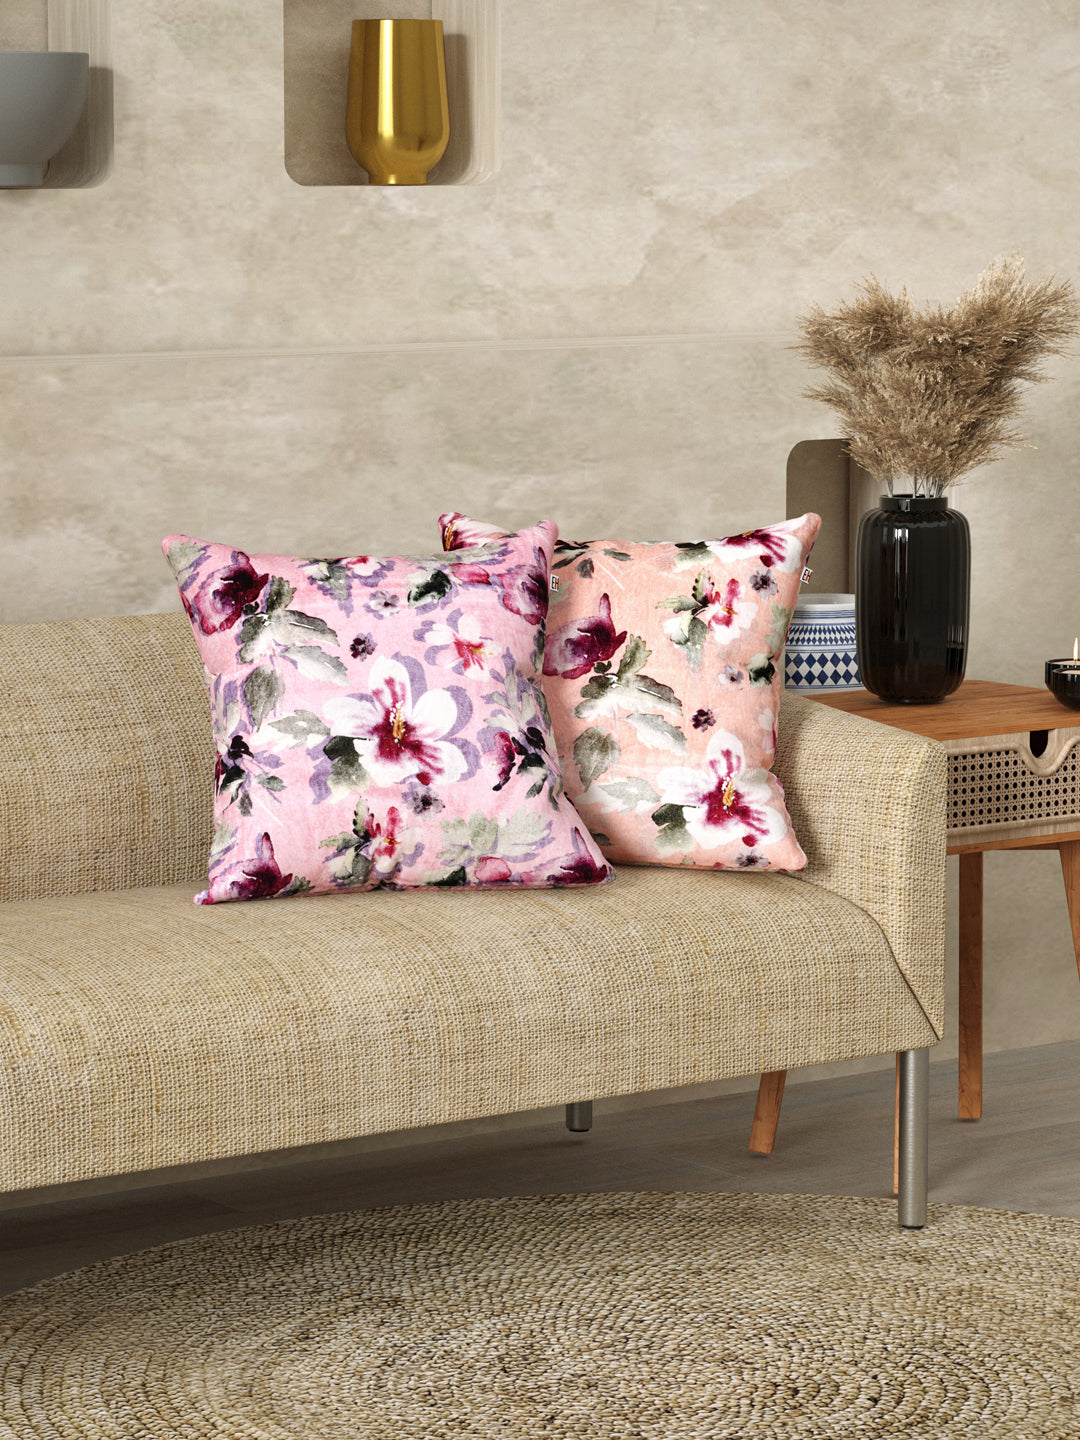 Peach & Purple Set of 2 water color based floral cushion covers